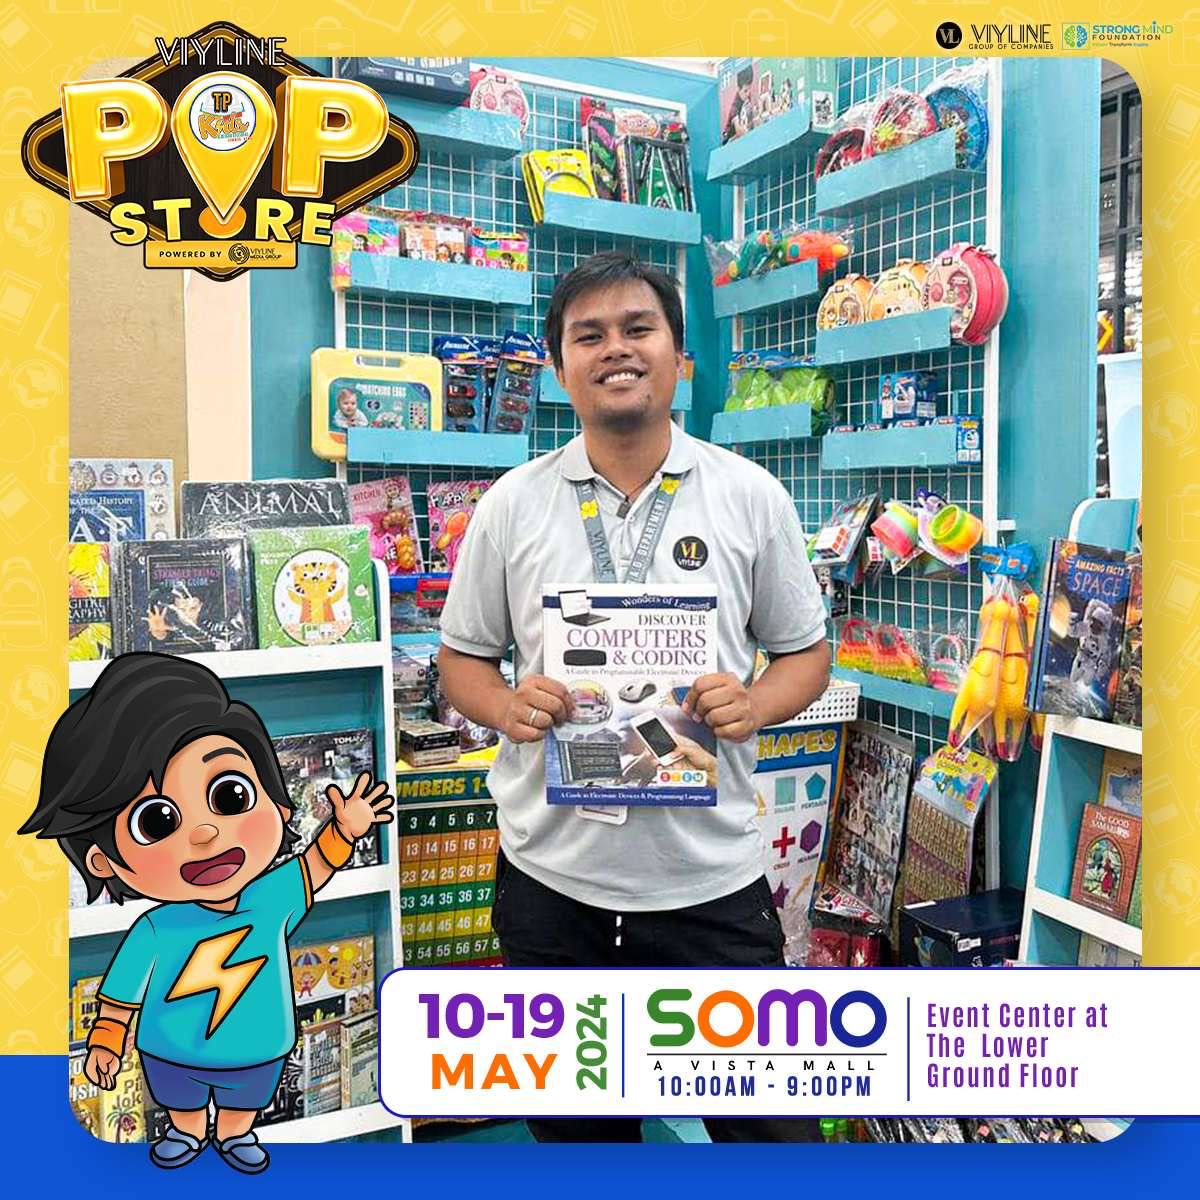 Spark their imagination! ✨ 

TP Kids books & toys for all ages at the Viyline Pop Store! Head to SOMO - A Vista Mall (May 10-19) for amazing finds! 💛

#TPKids #ViylinePopStore #LearningMaterials